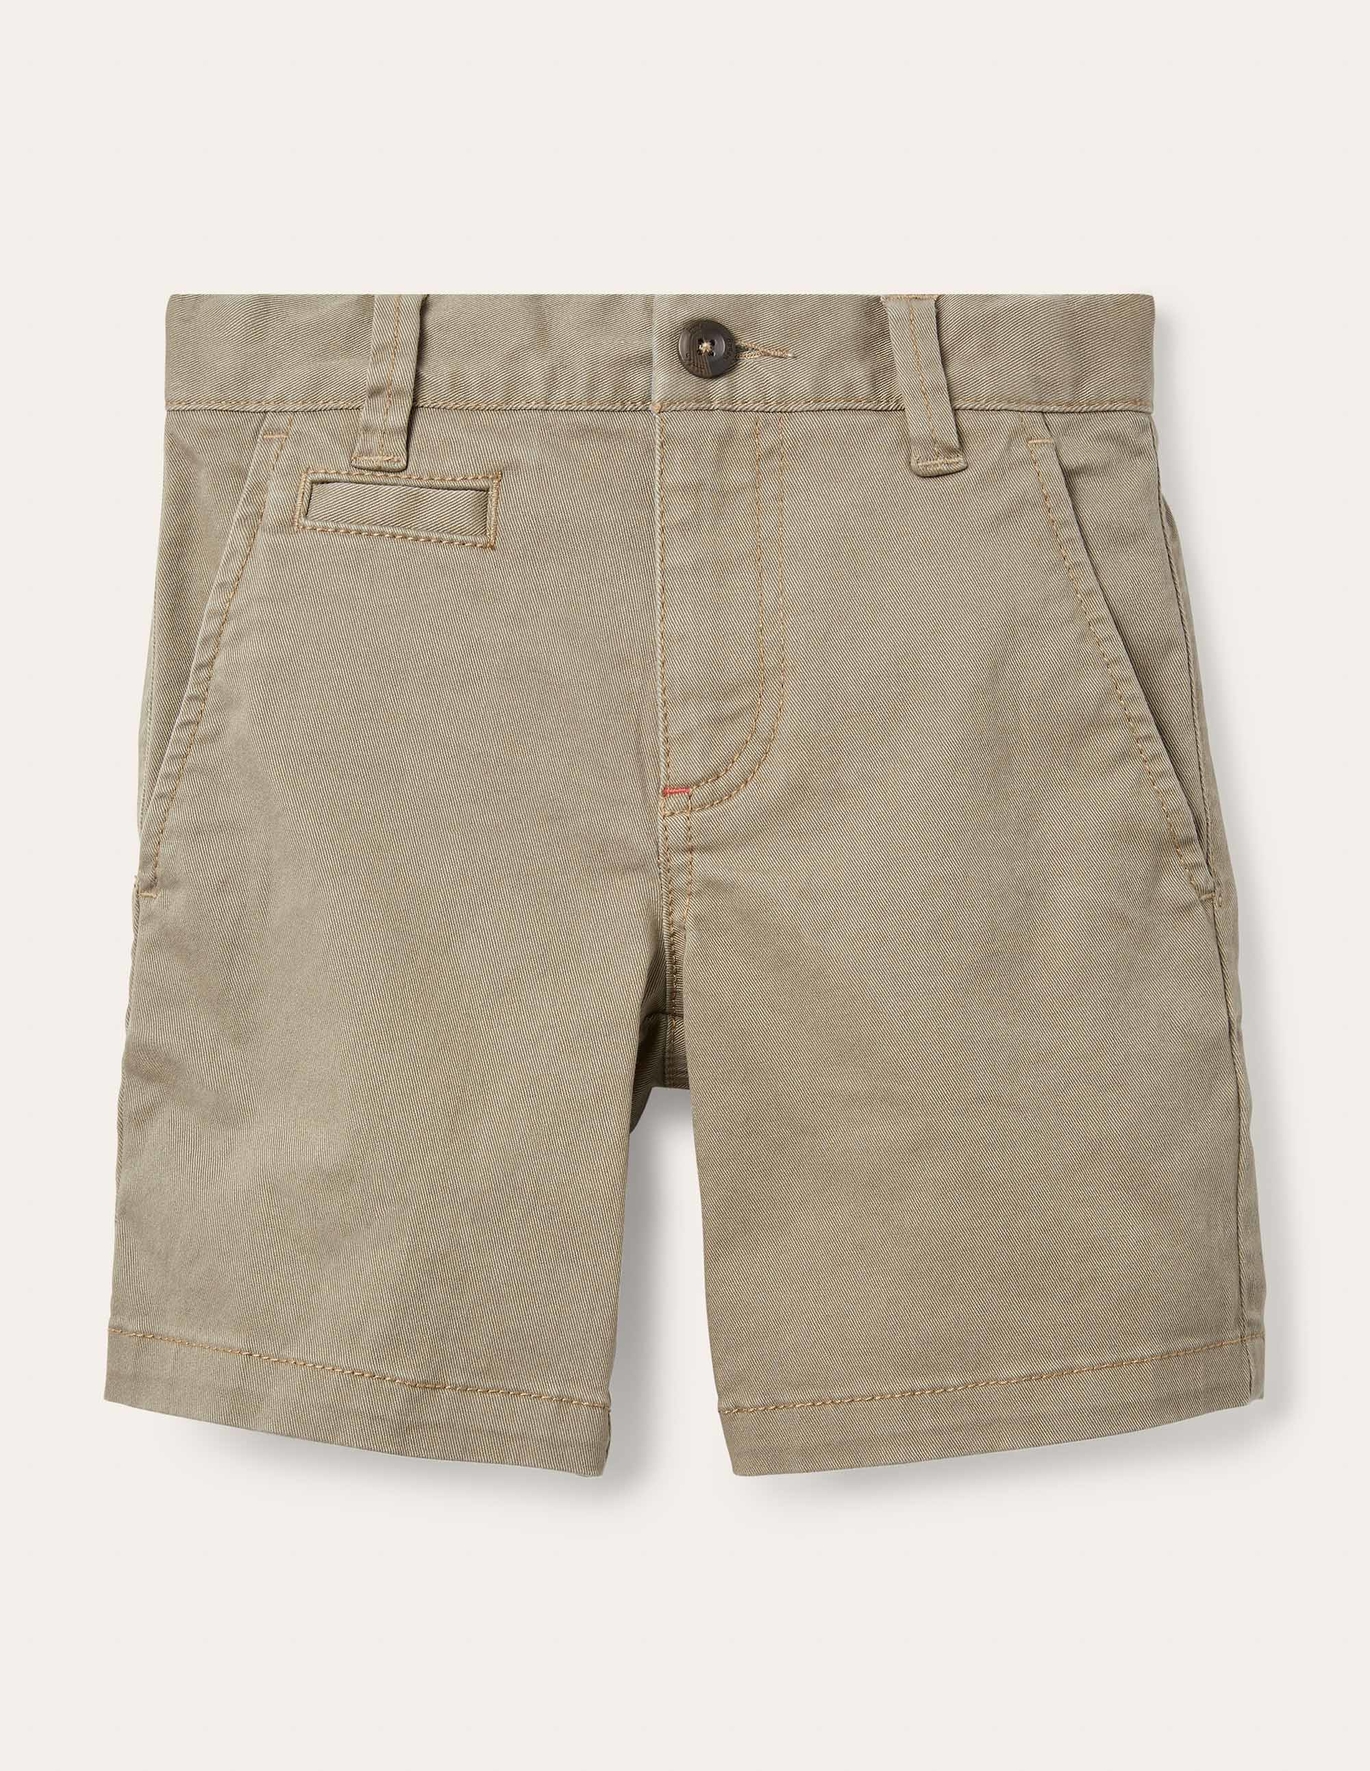 Boden Chino Shorts - Nutty Brown